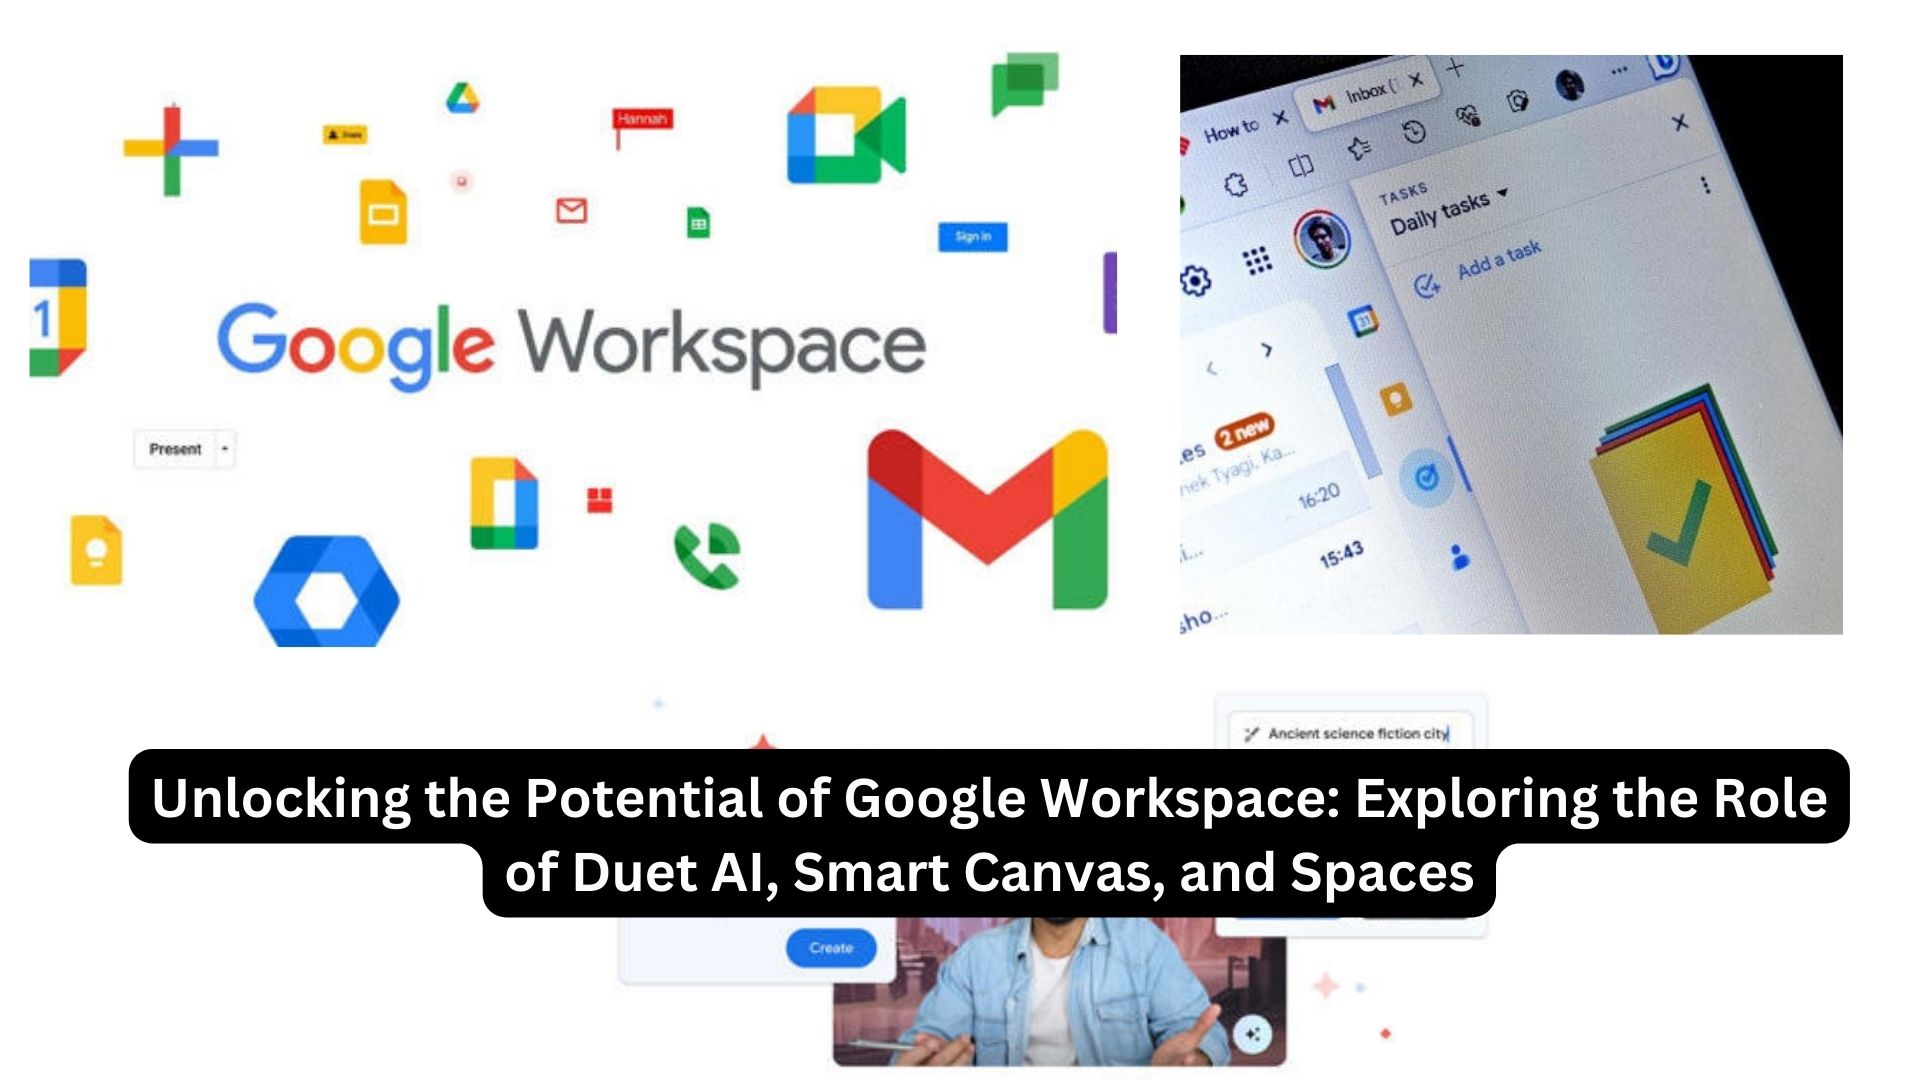 Unlocking the Potential of Google Workspace: Exploring the Role of Duet AI, Smart Canvas, and Spaces